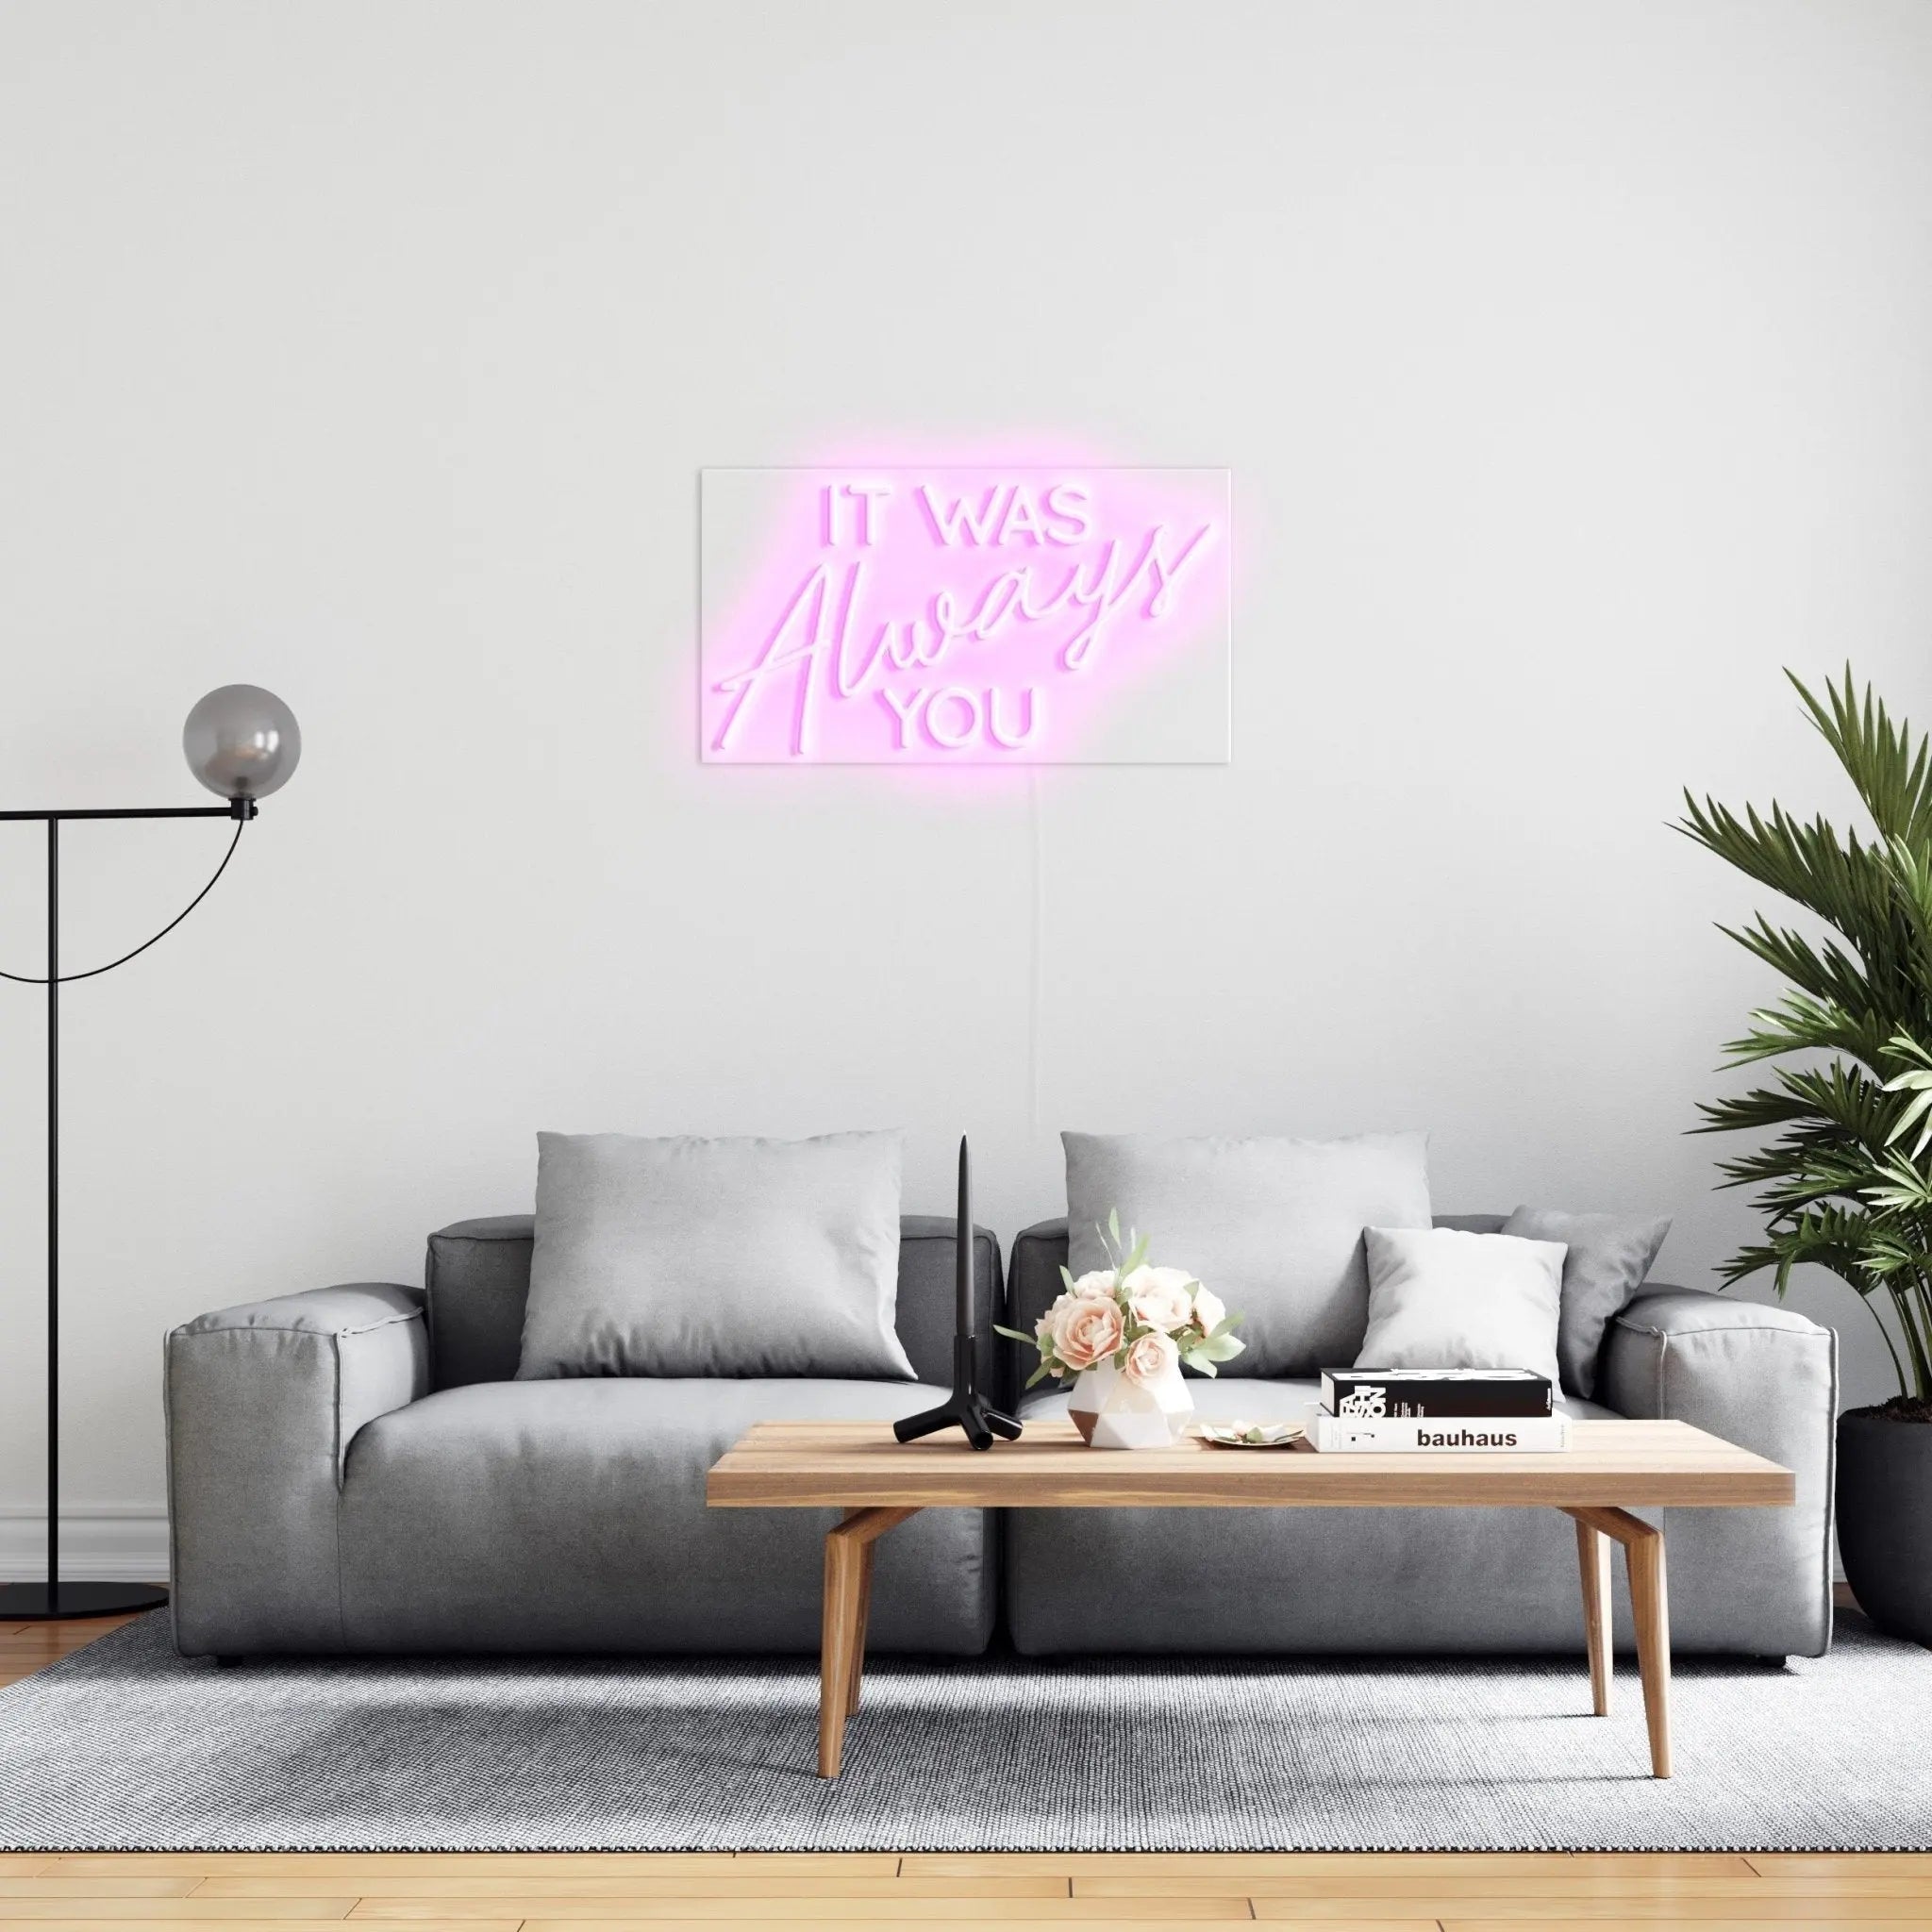 'IT WAS Always YOU' LED Neon Sign - neonaffair